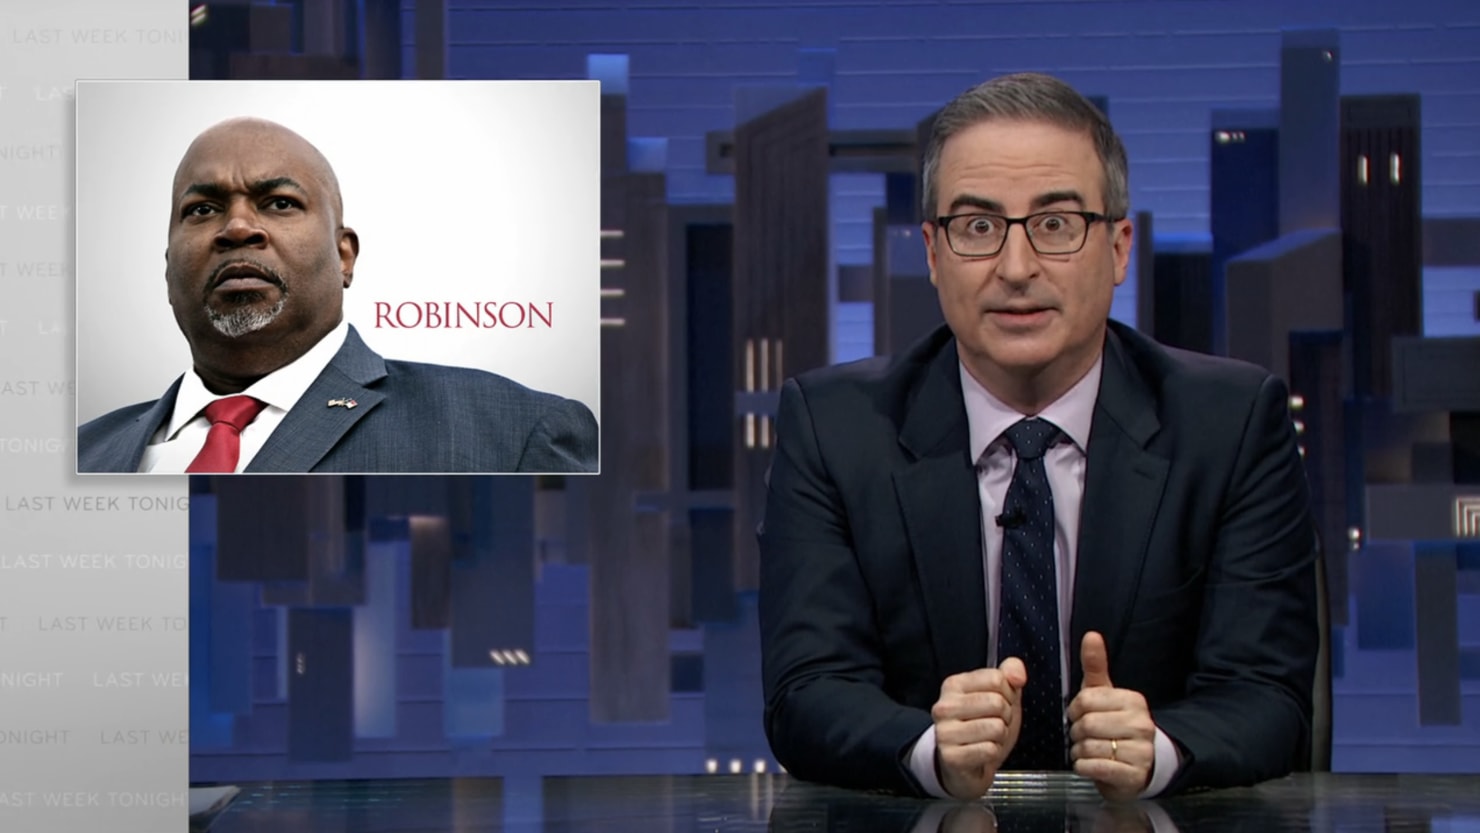 John Oliver Tears Apart GOP’s Most Unhinged 2024 Candidate